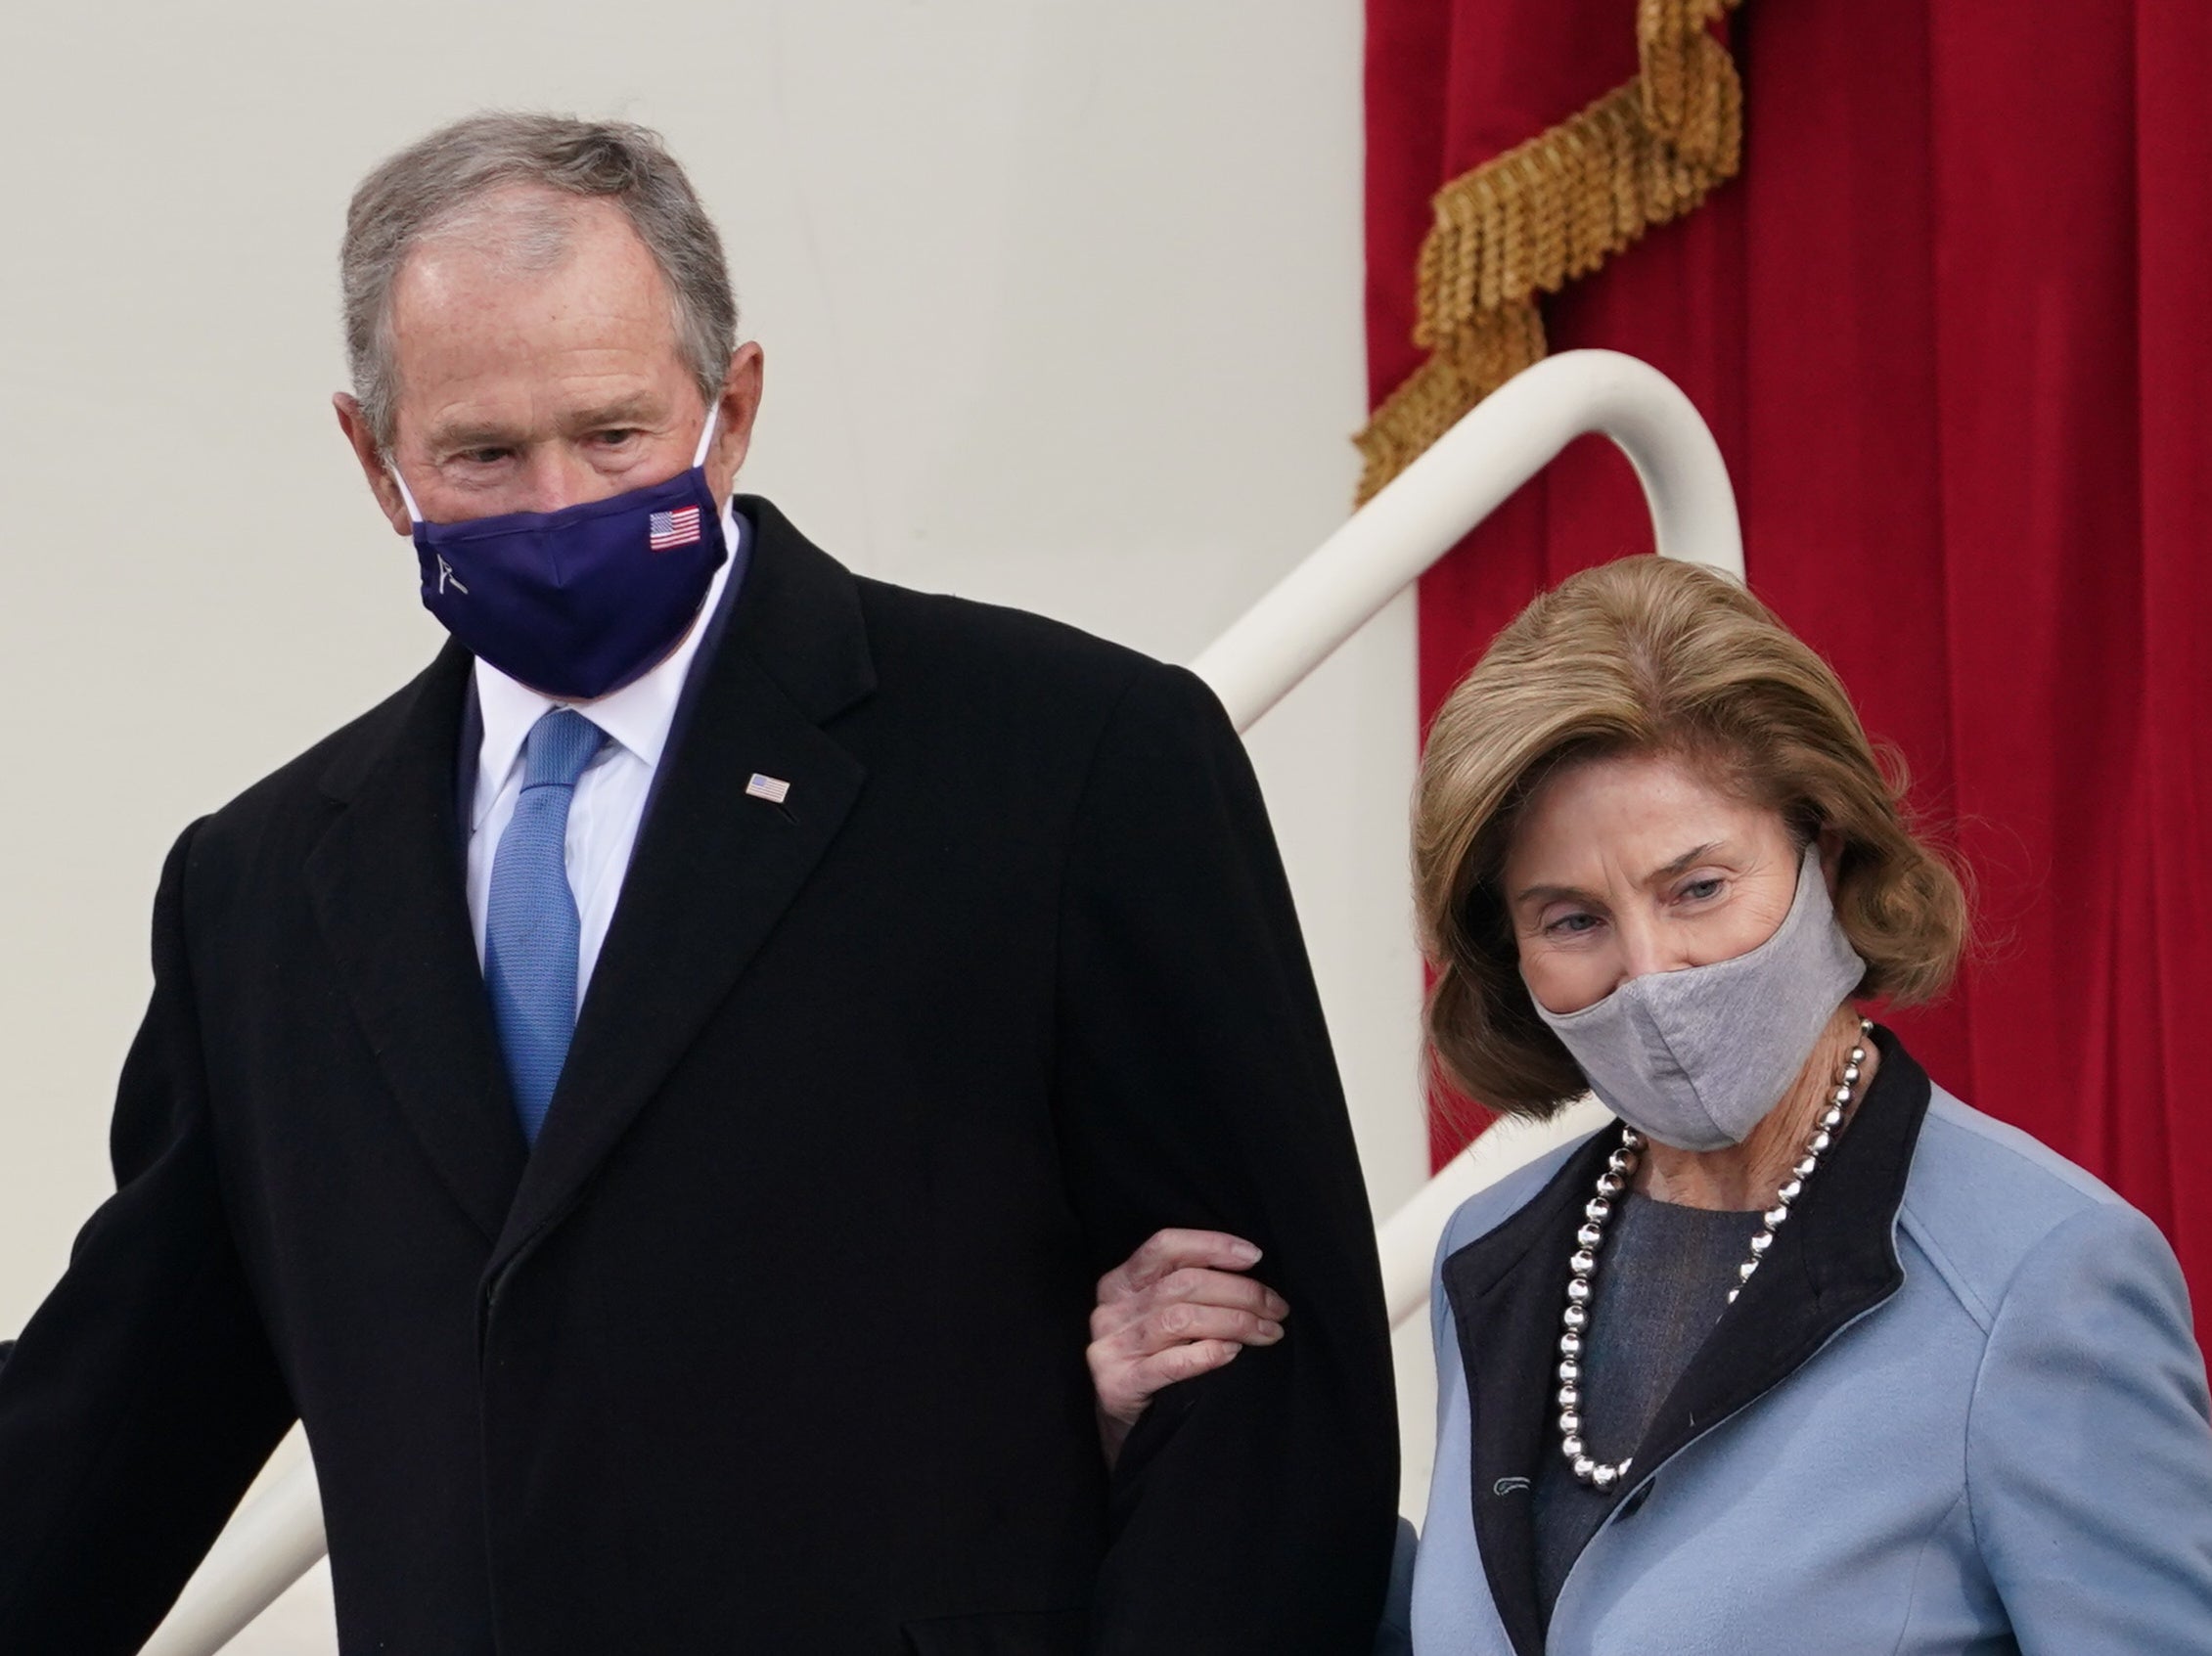 Former President George W Bush and his wife Laura Bush arrive for the inauguration ceremony of Joe Biden as the 46th President of the United States on the West Front of the Capitol